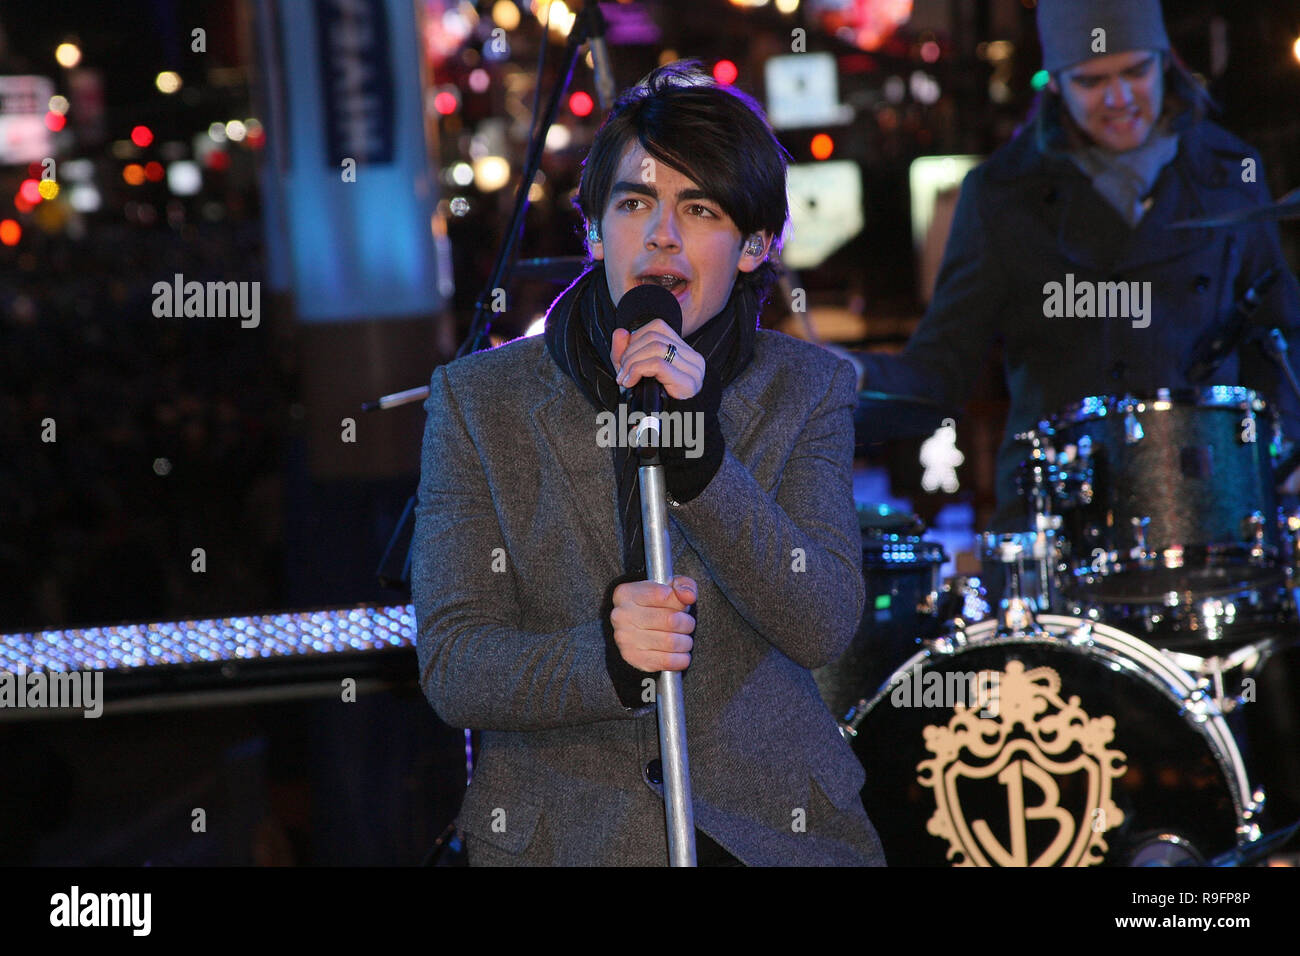 NEW YORK - DECEMBER 31:  Joe Jonas gf the Jonas Brothers performs on stage at the ceremony to lower the New Years Eve ball in Times Square on December 31, 2008 in New York City.  (Photo by Steve Mack/S.D. Mack Pictures) Stock Photo